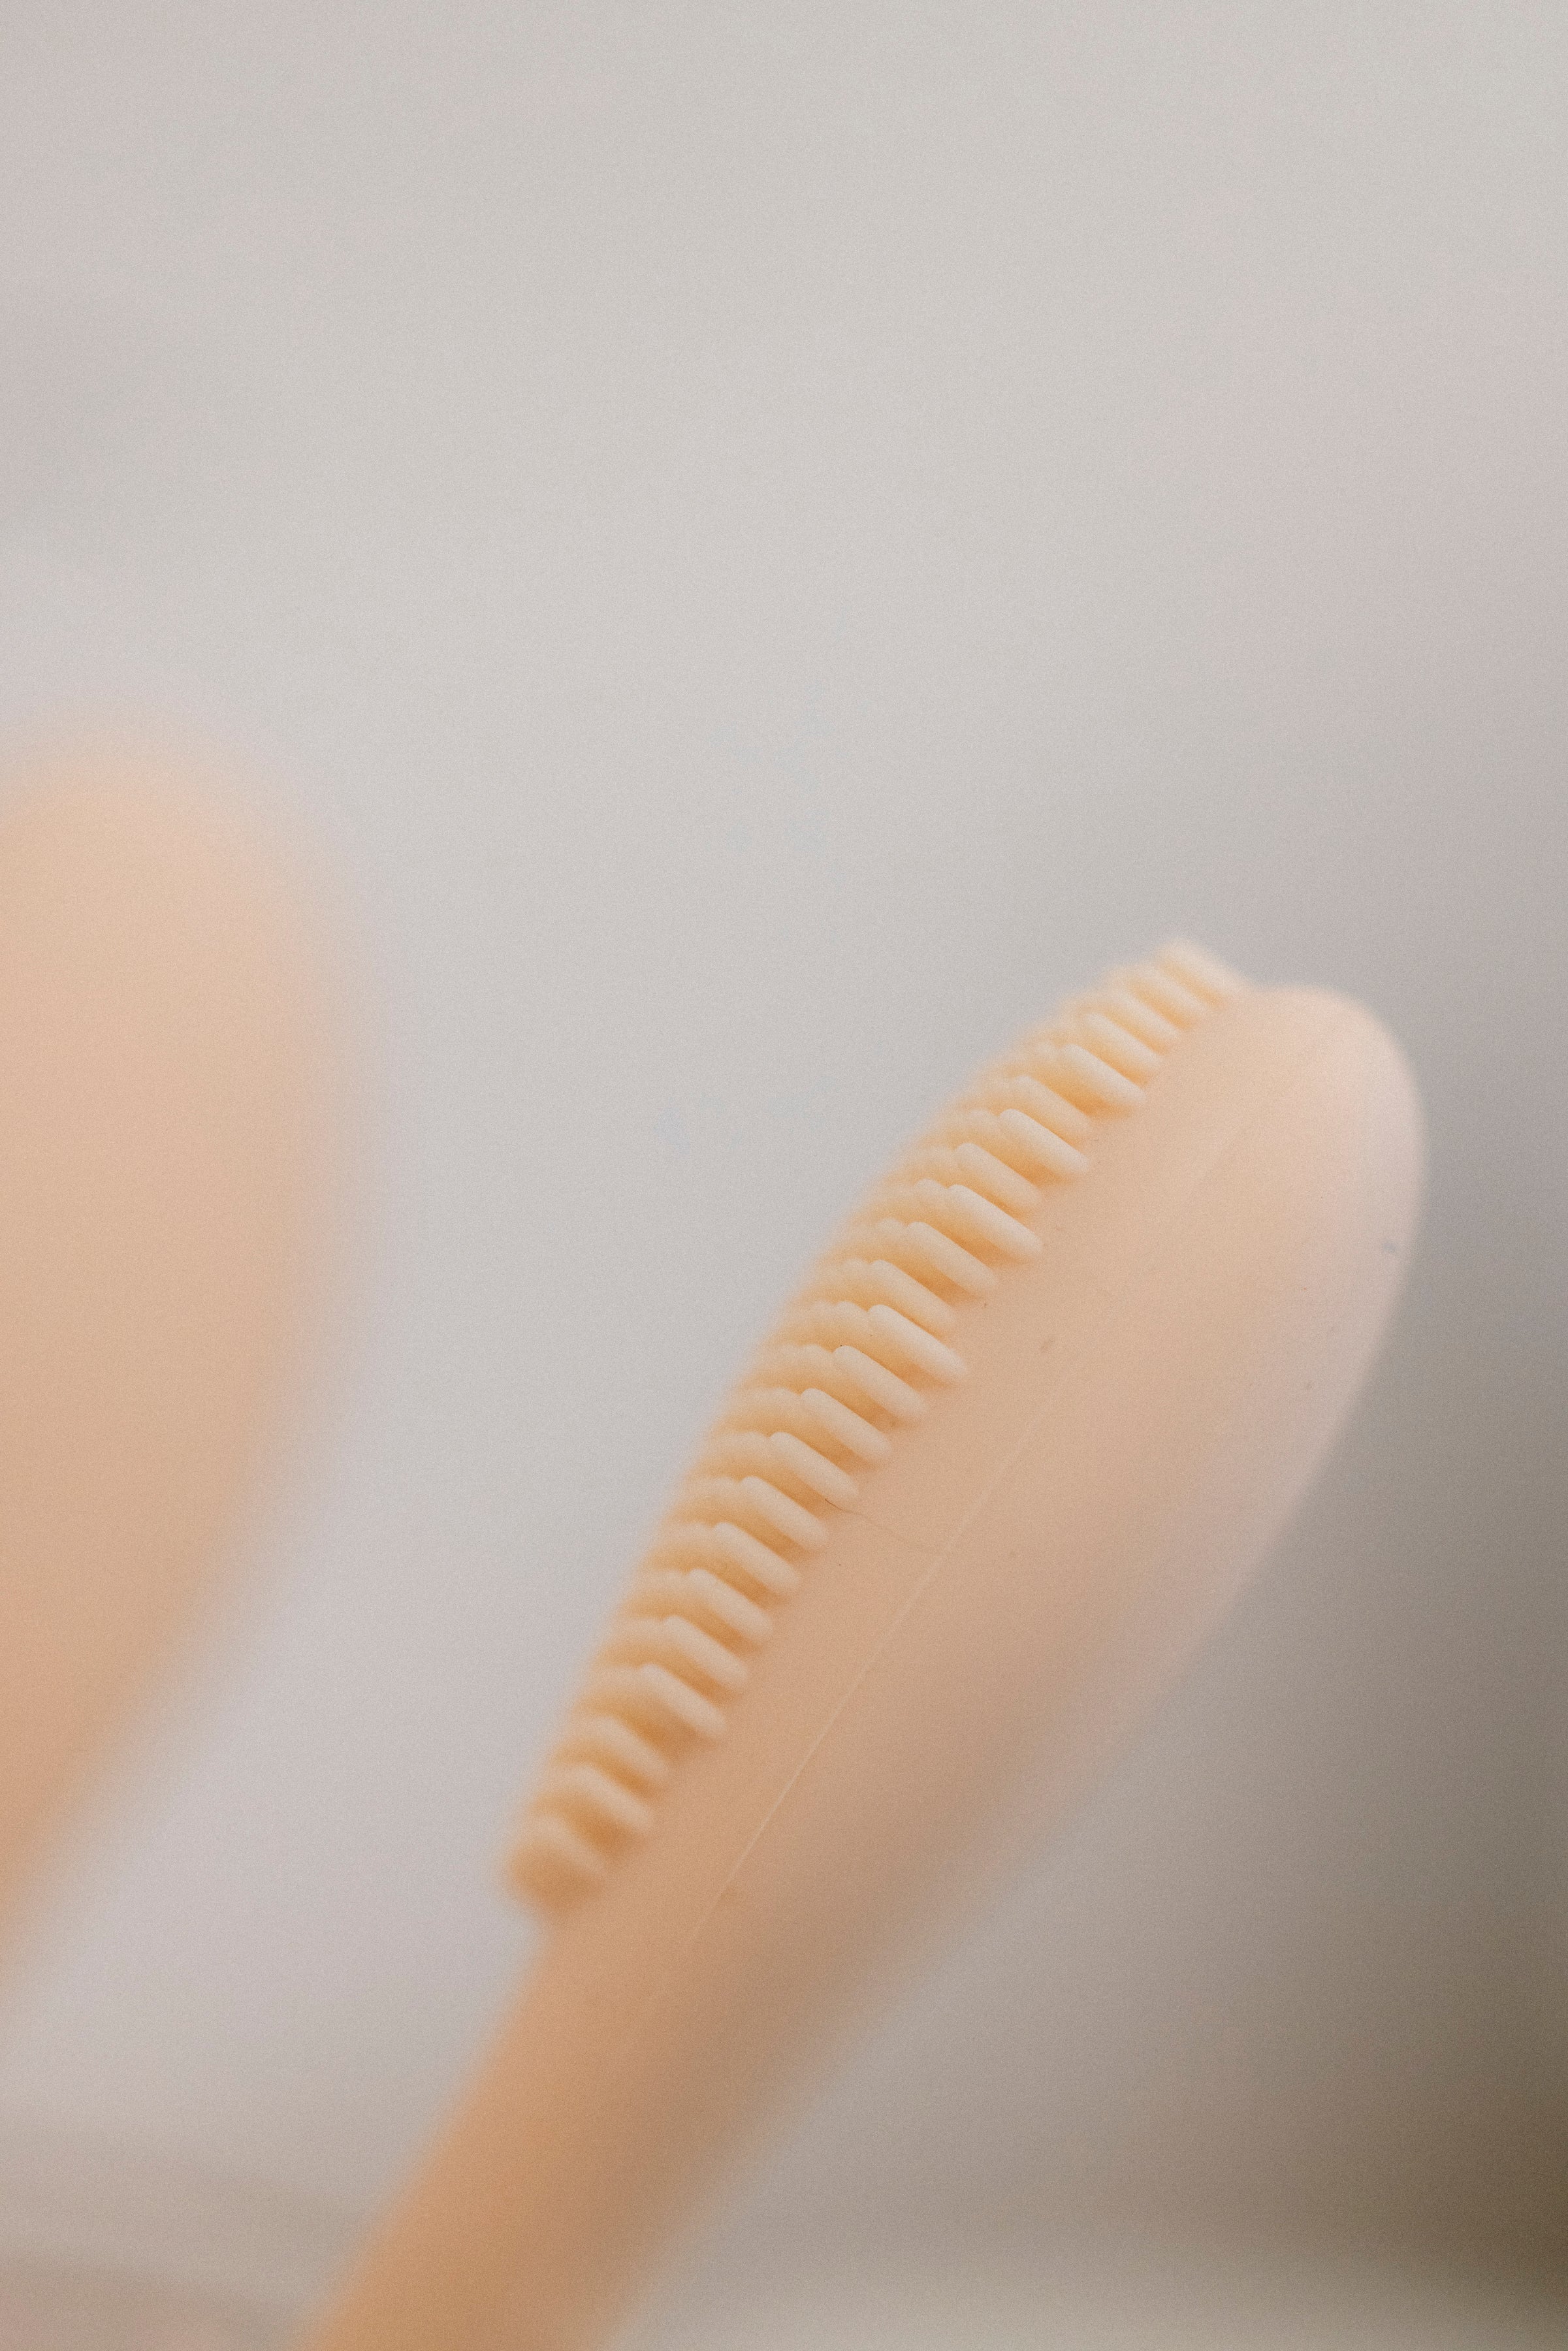 Deep Cleanse Silicone Brush